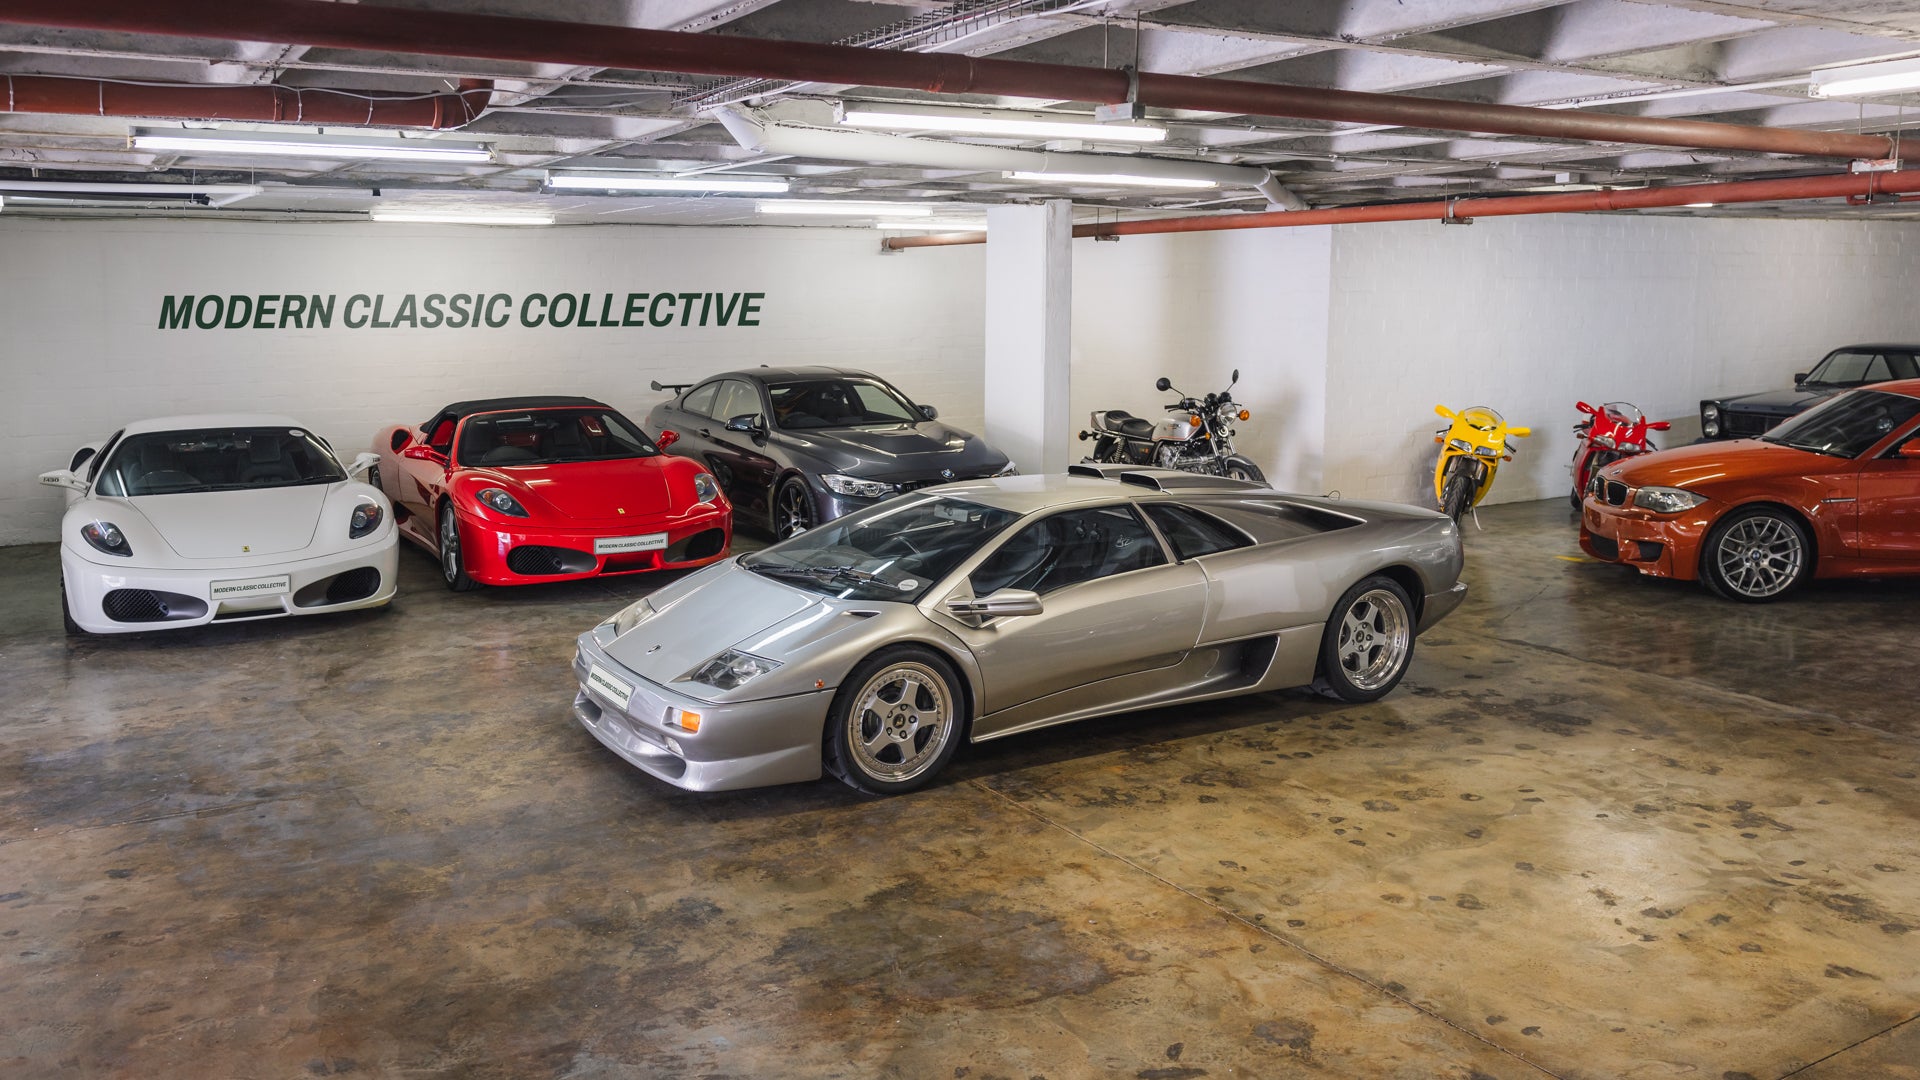 This Modern Classic Collectives showroom, displaying a Lamborghini Diablo SV and a Ferrari F430 Spider F1 and Ferrari F430 Coupe and a BMW 1M in Valencia Orange and two classic ducati 996s and a Honda CBX